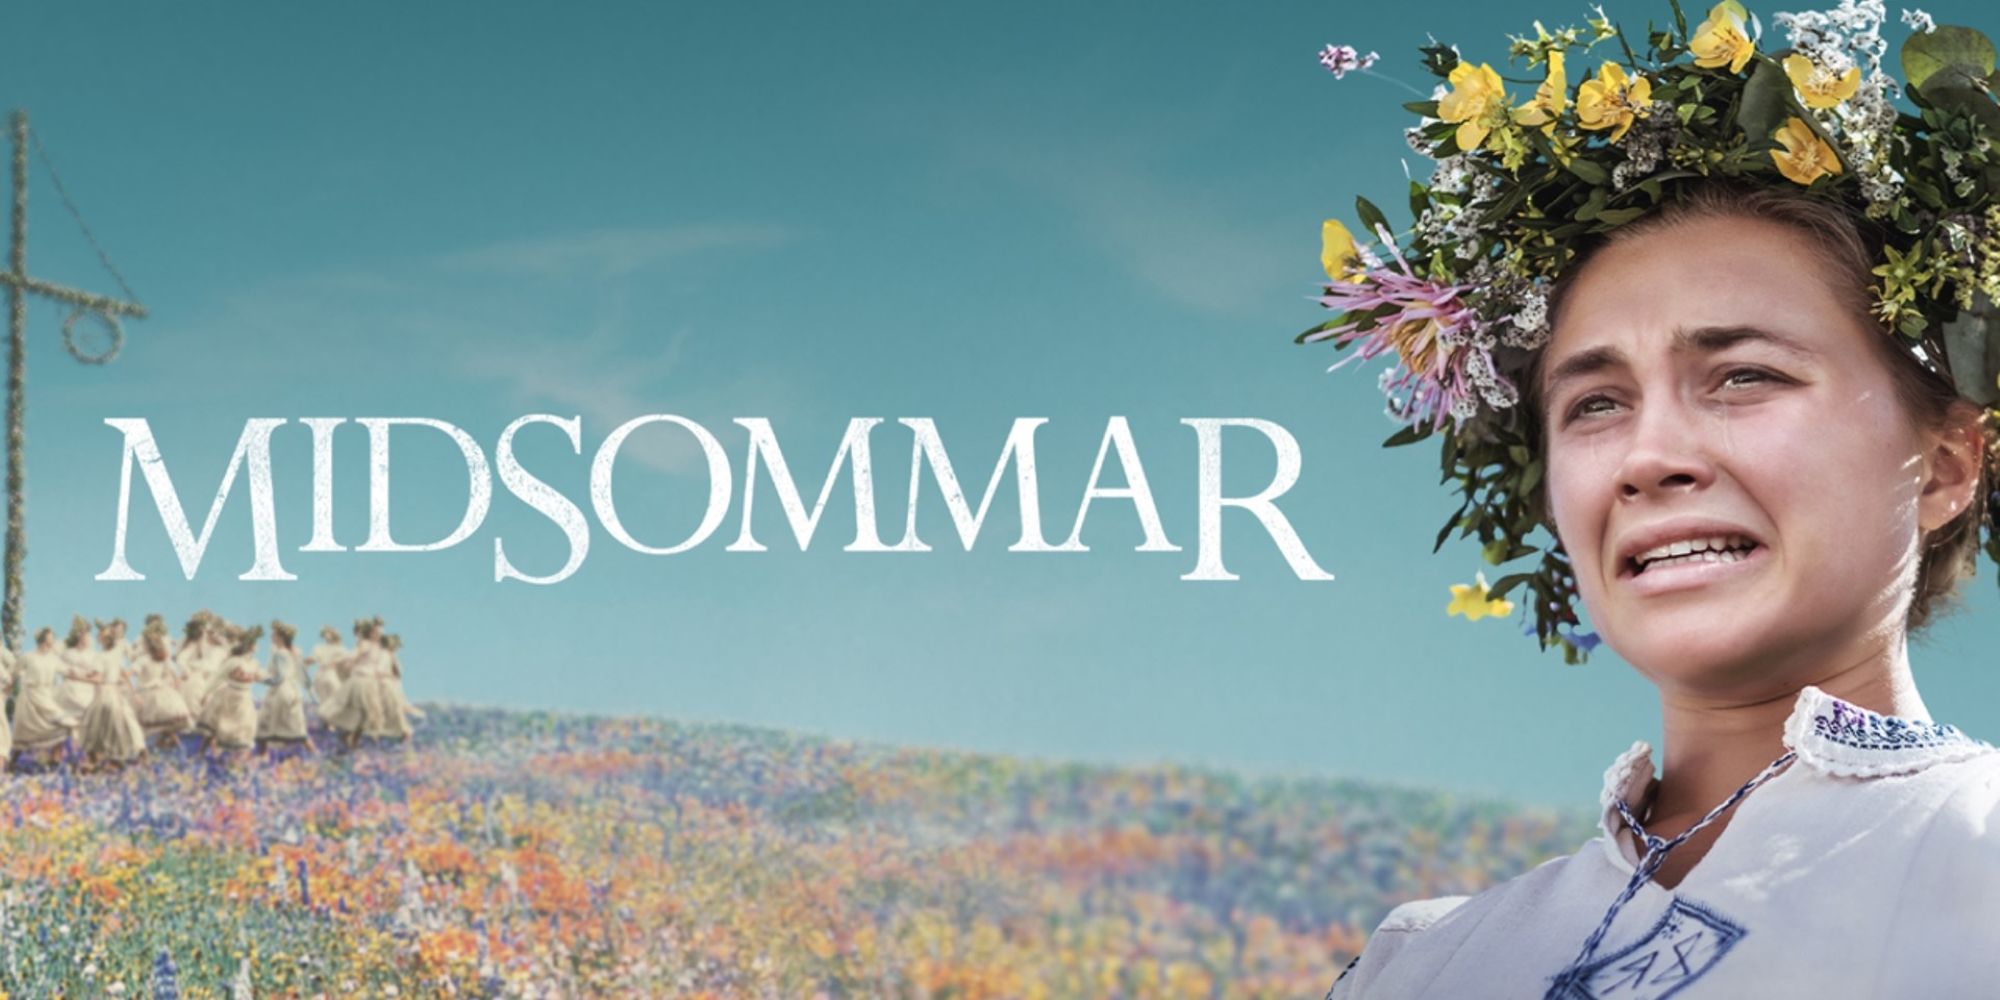 Florence Pugh with flowers in her hair in Midsommar